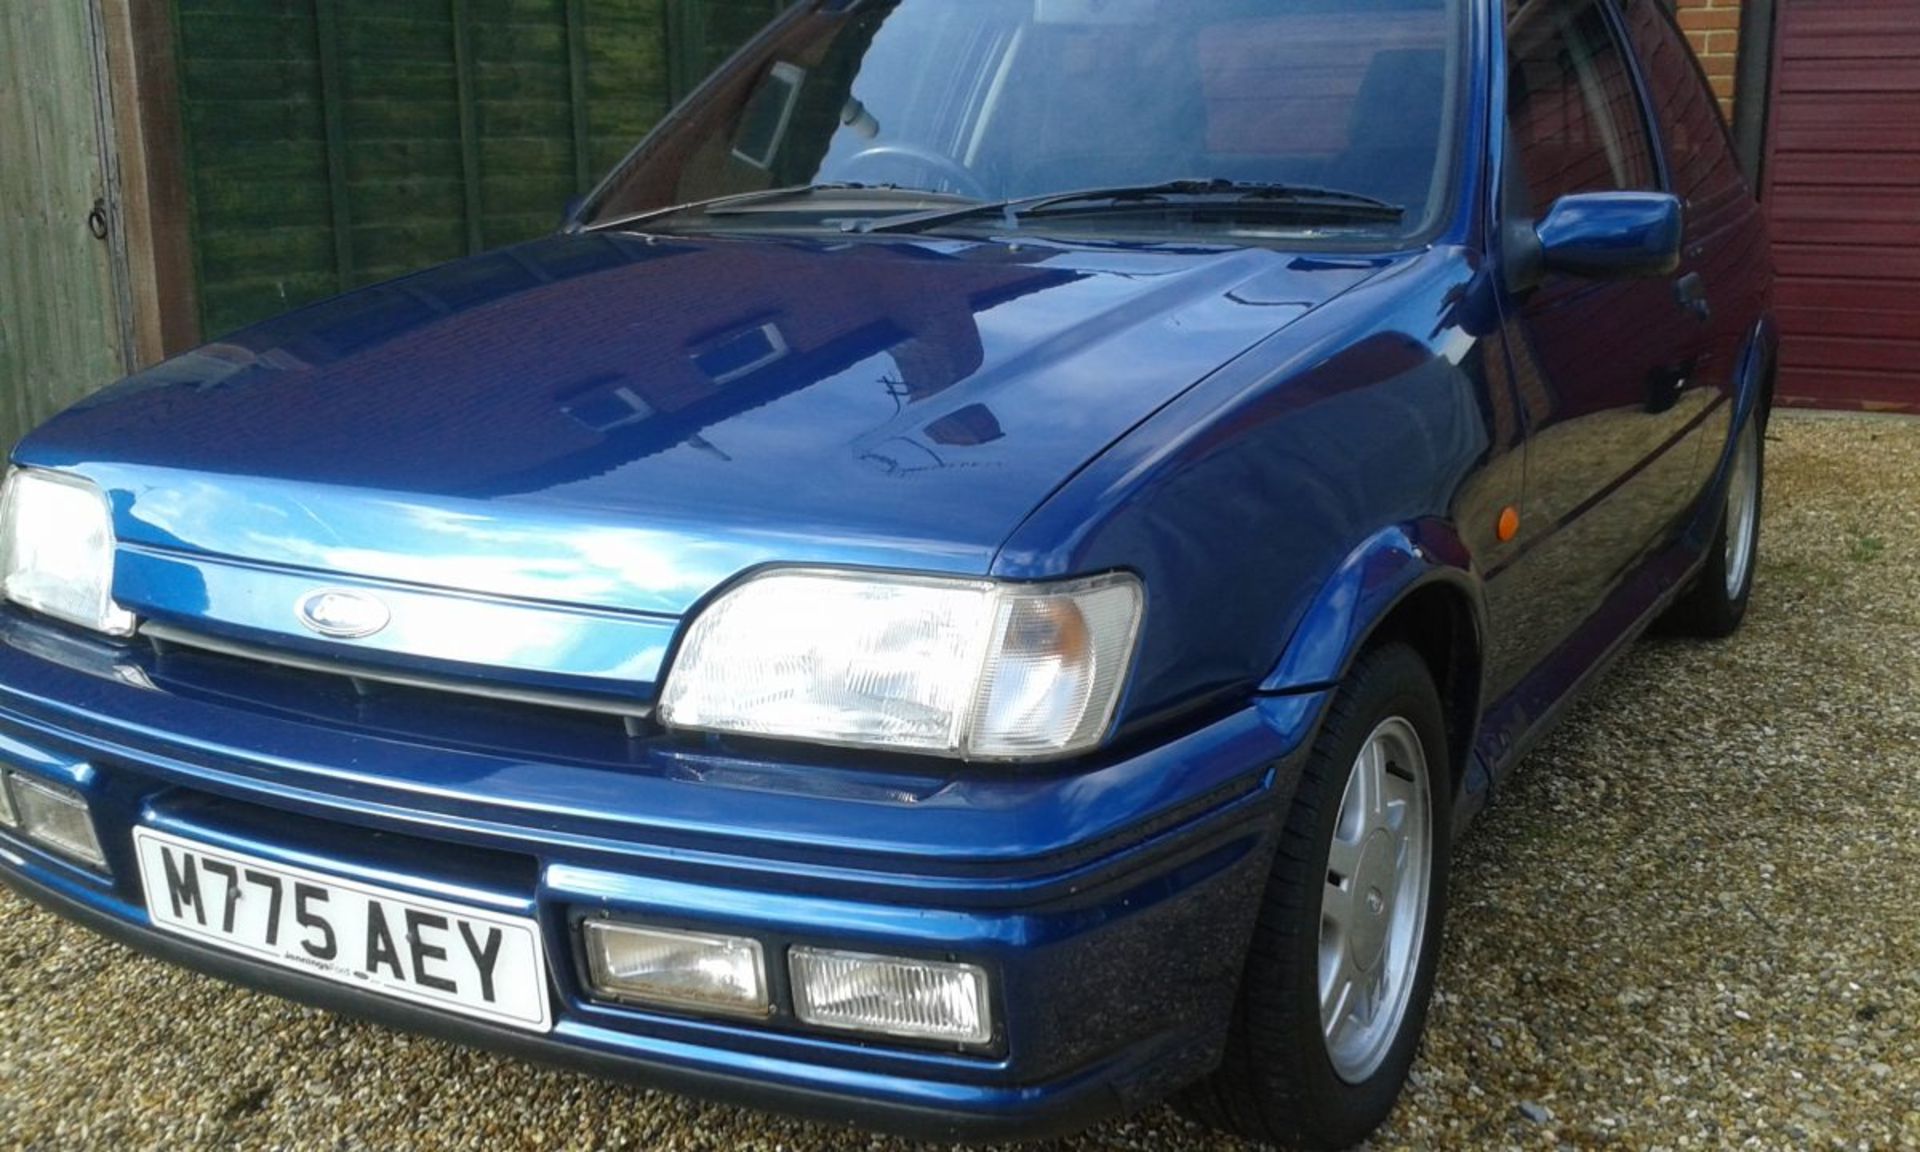 Ford Fiesta RS1800i 1994 - After Ford removed the “turbo” from the Fiesta range its replacement